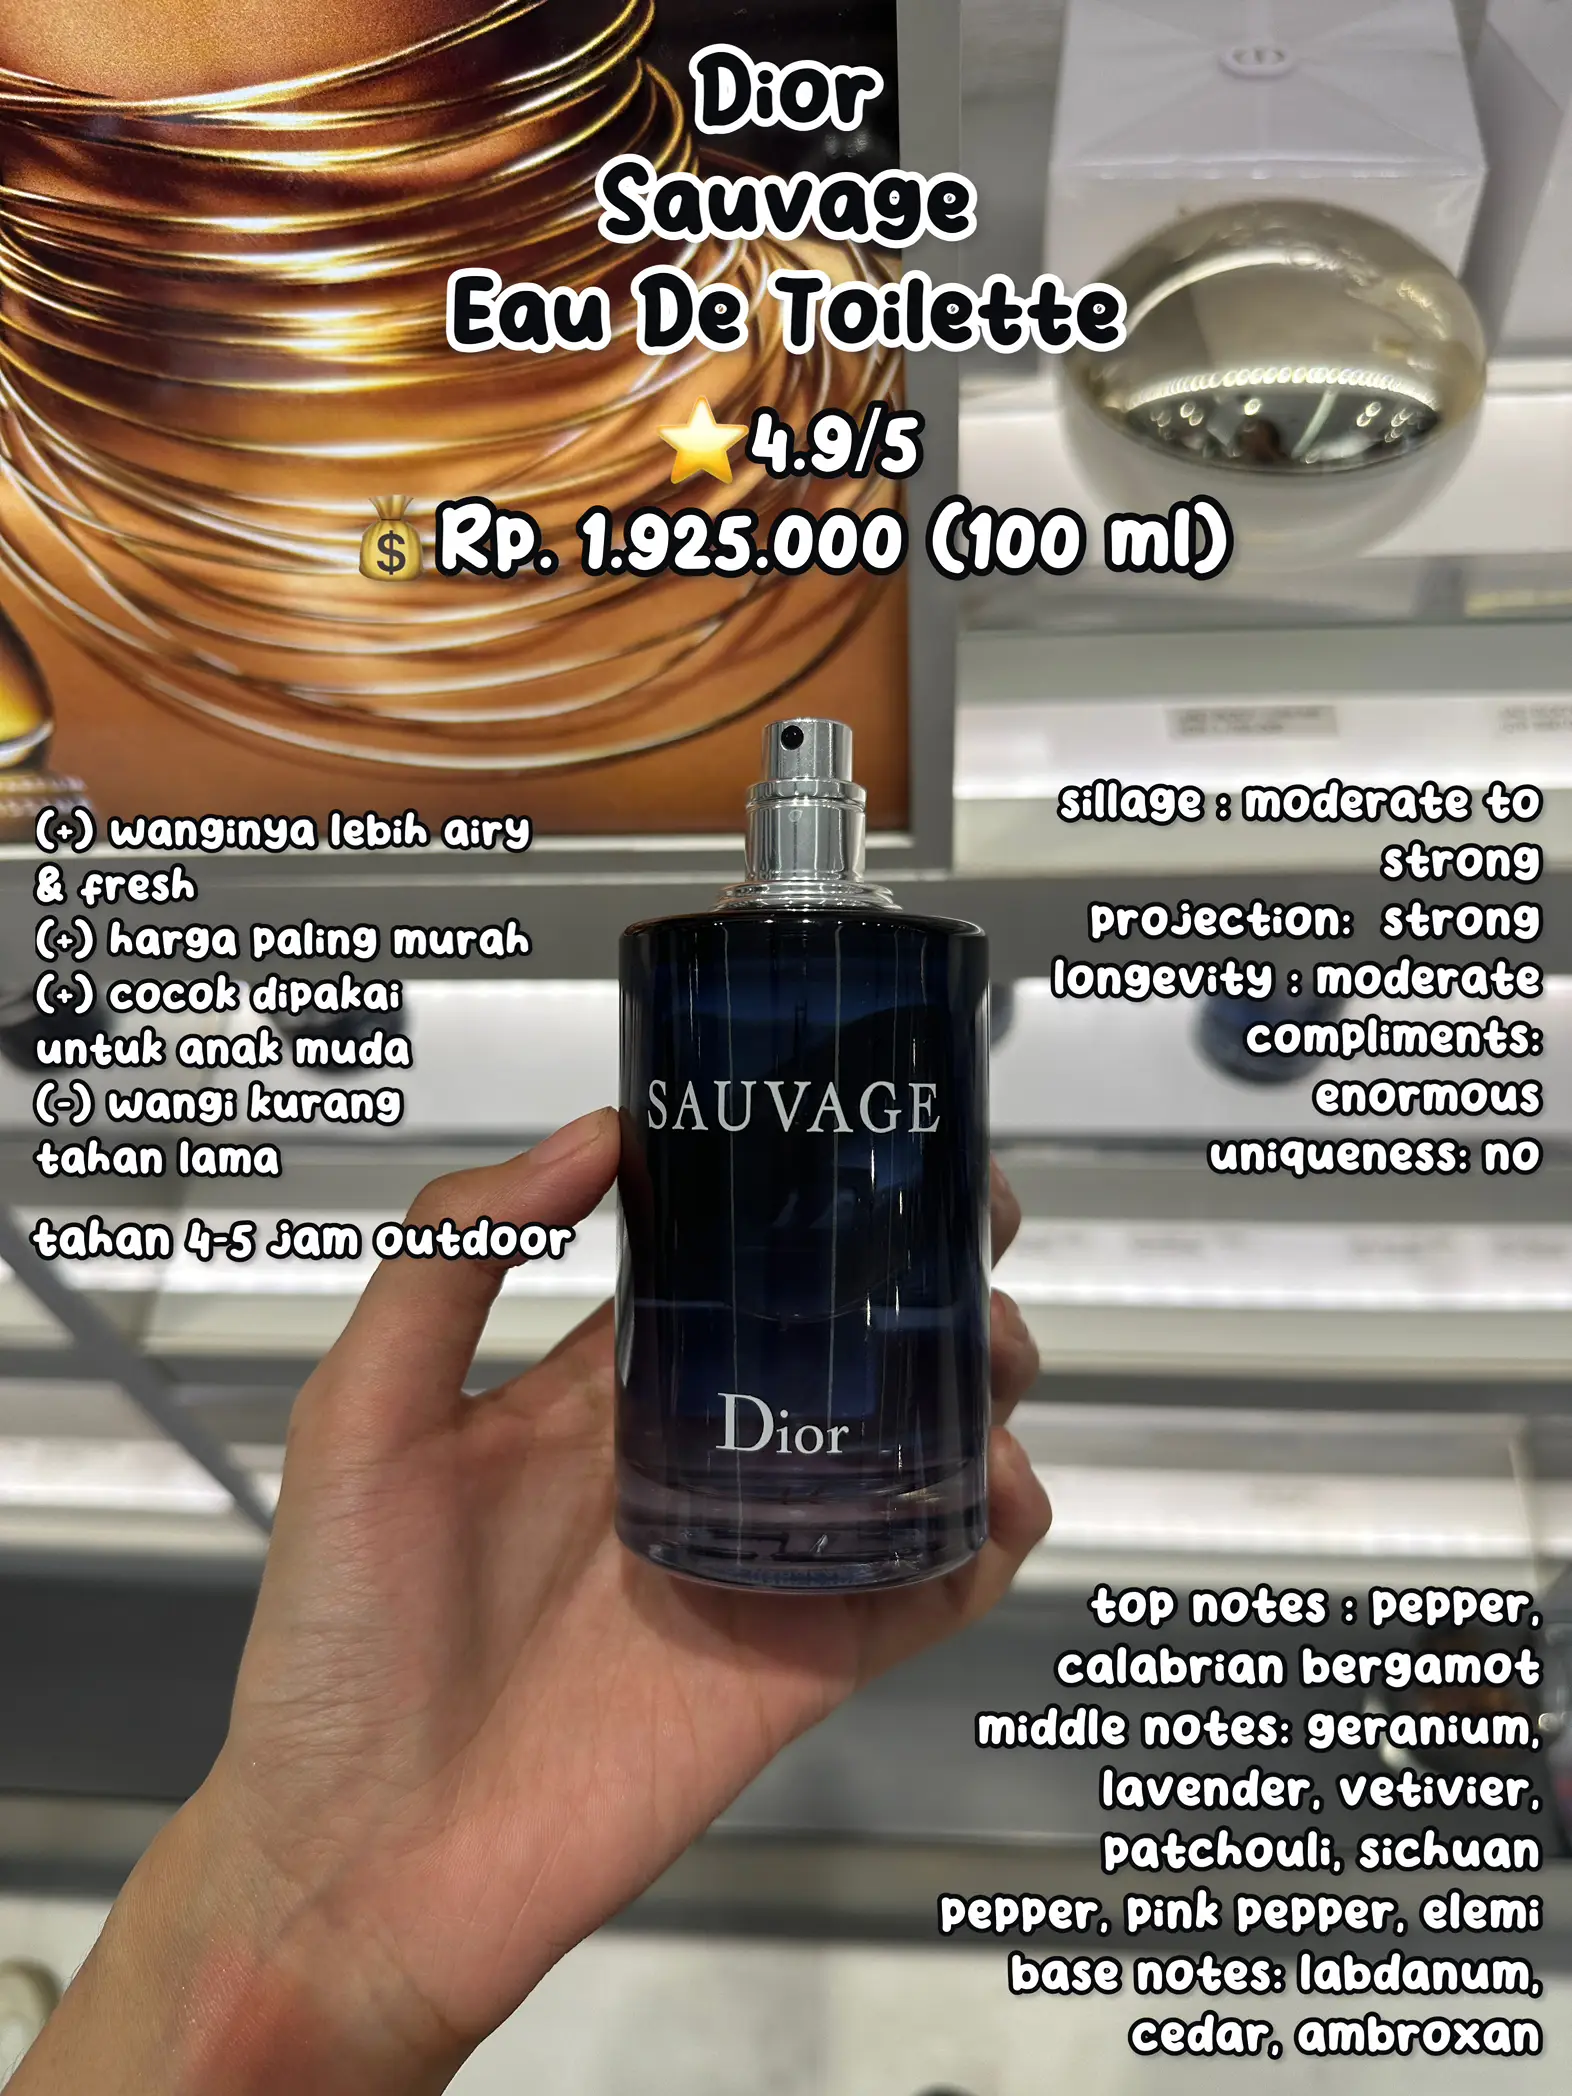 SAVE] Perbedaan Parfum Dior Sauvage!💣✨, Gallery posted by Putri A.